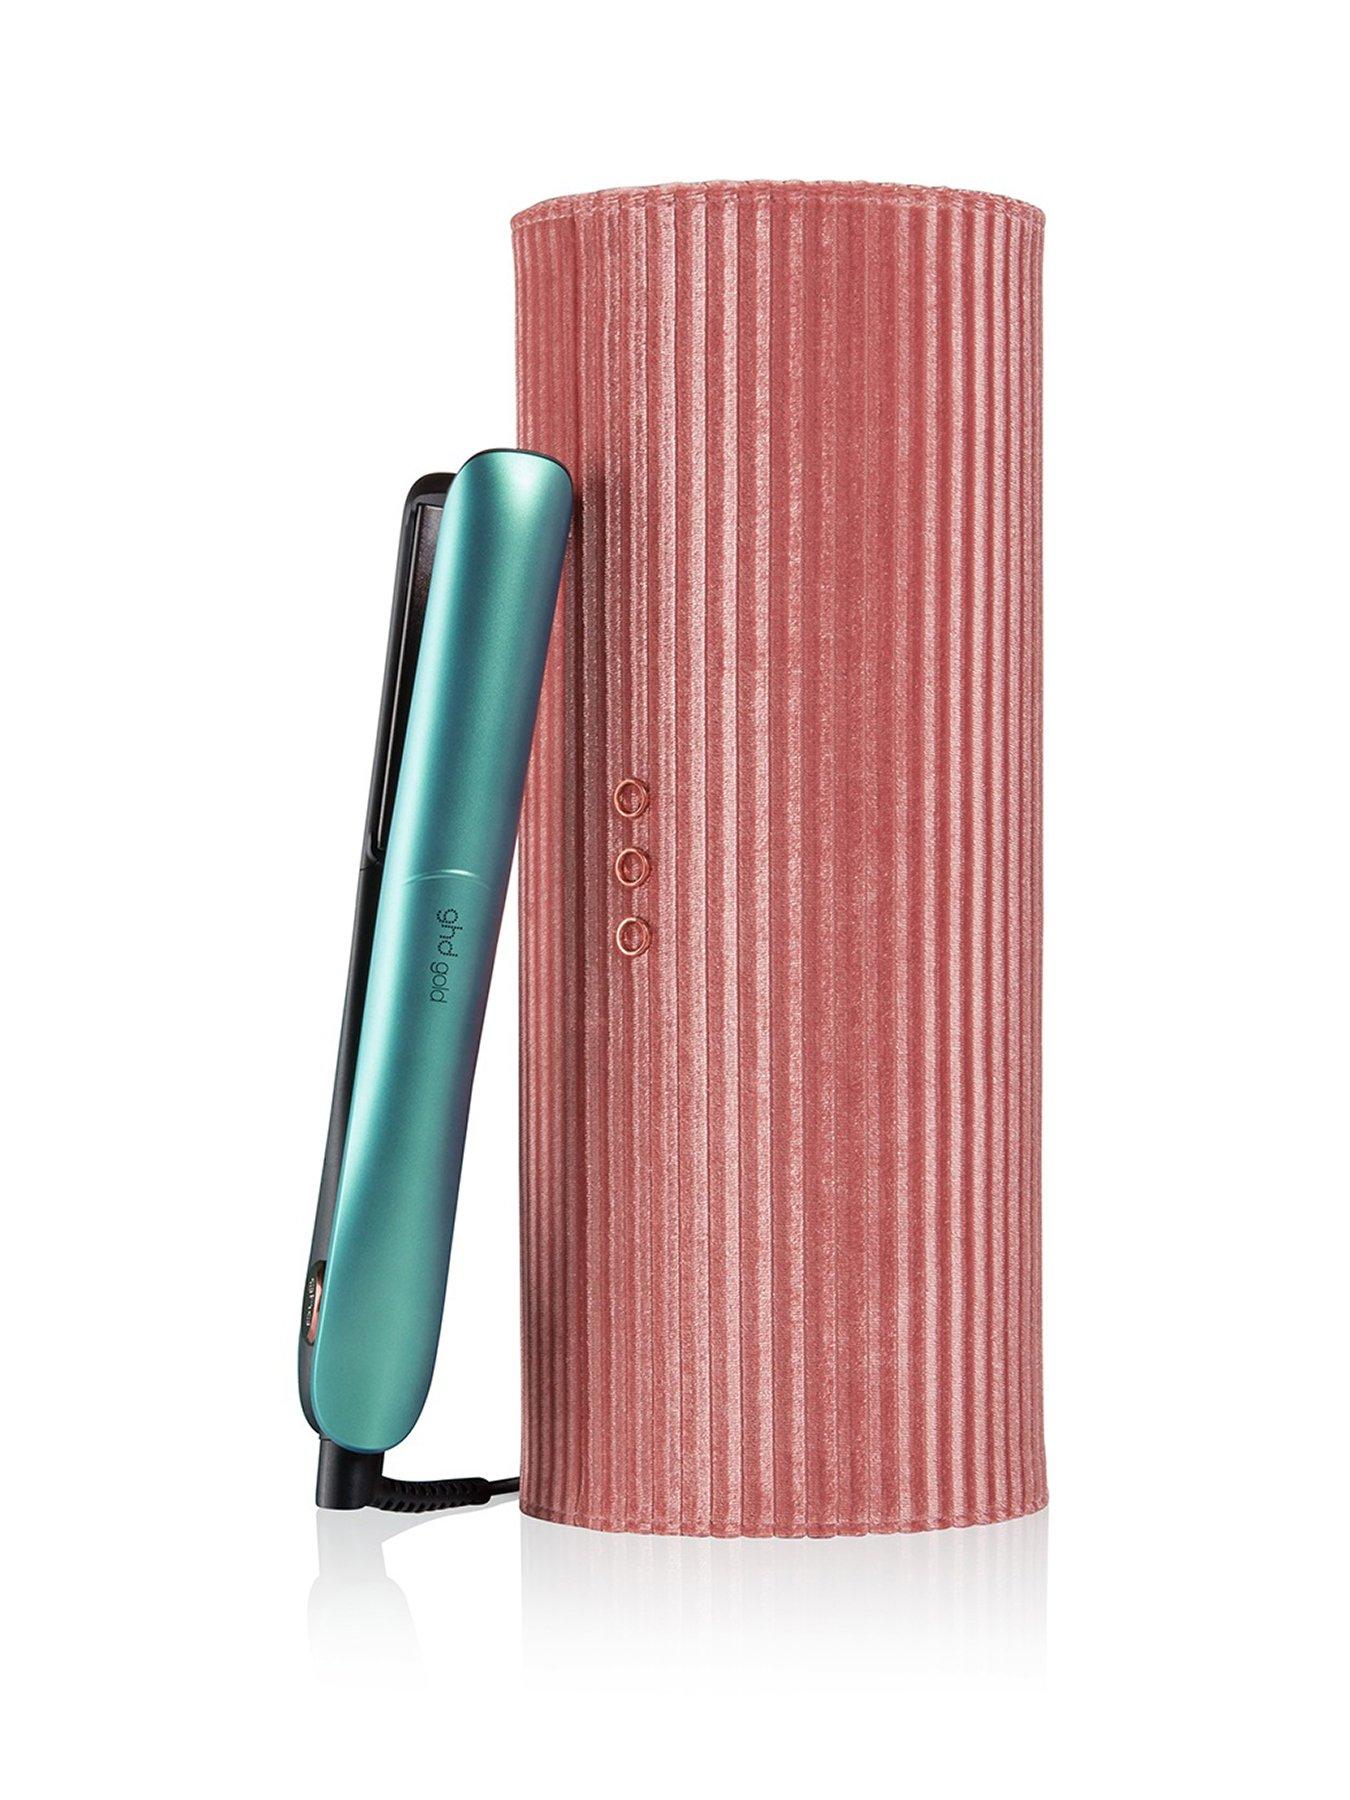 ghd Gold Limited Edition Straightener Gift Set in Jade (Worth £249)